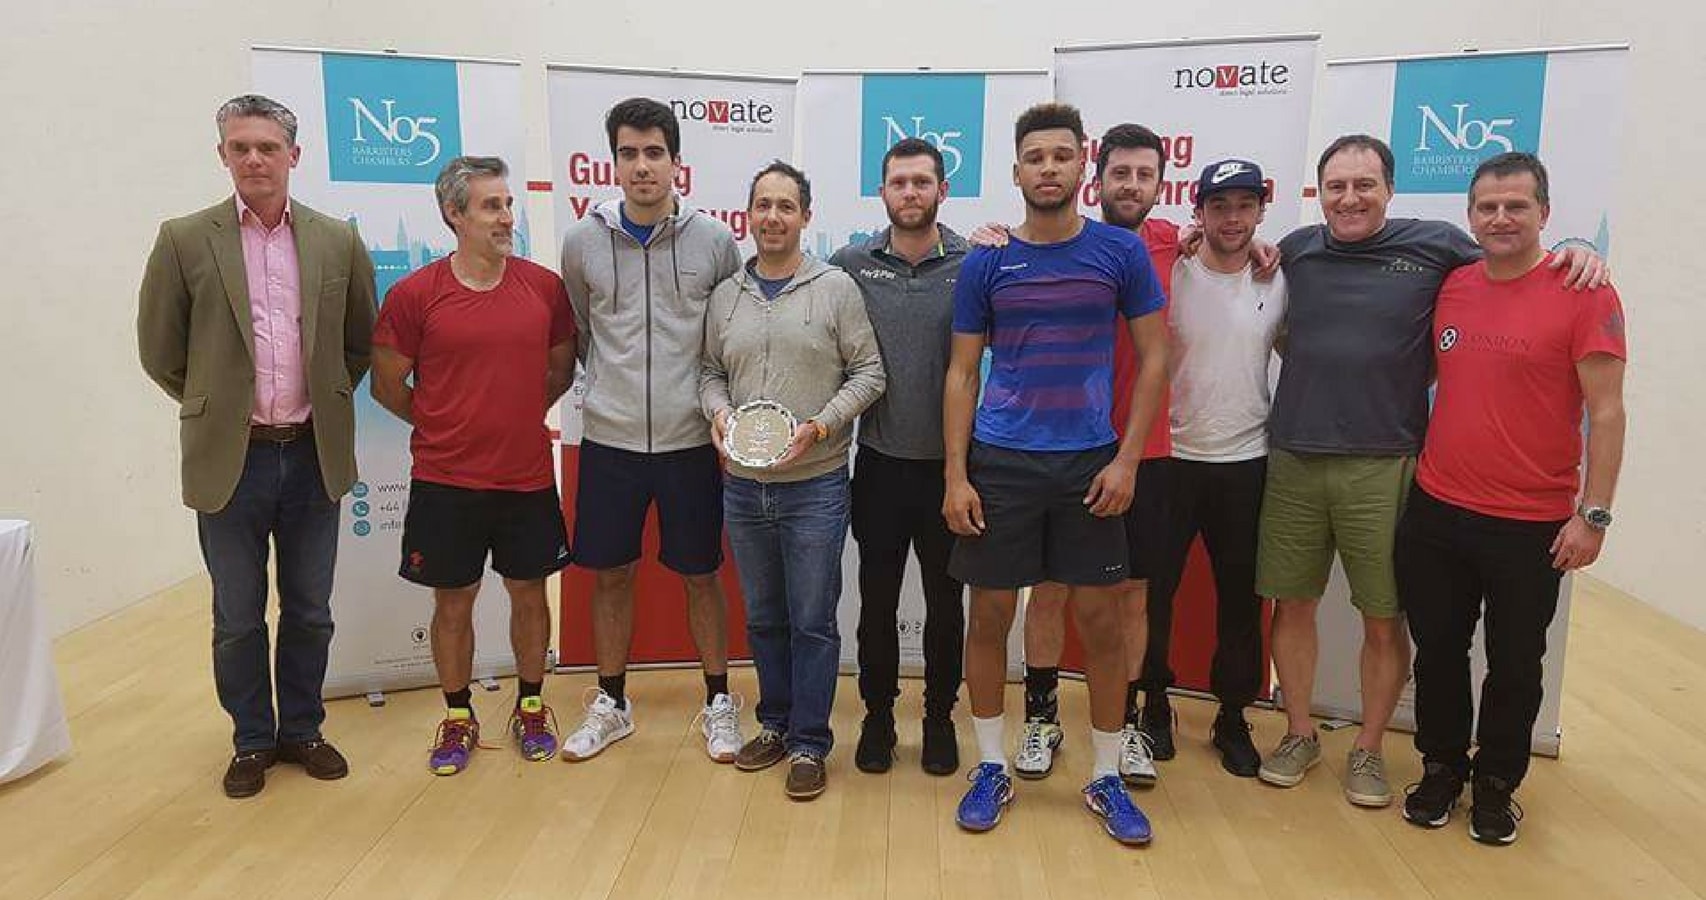 The winning Colets team featured World No.12 Daryl Selby